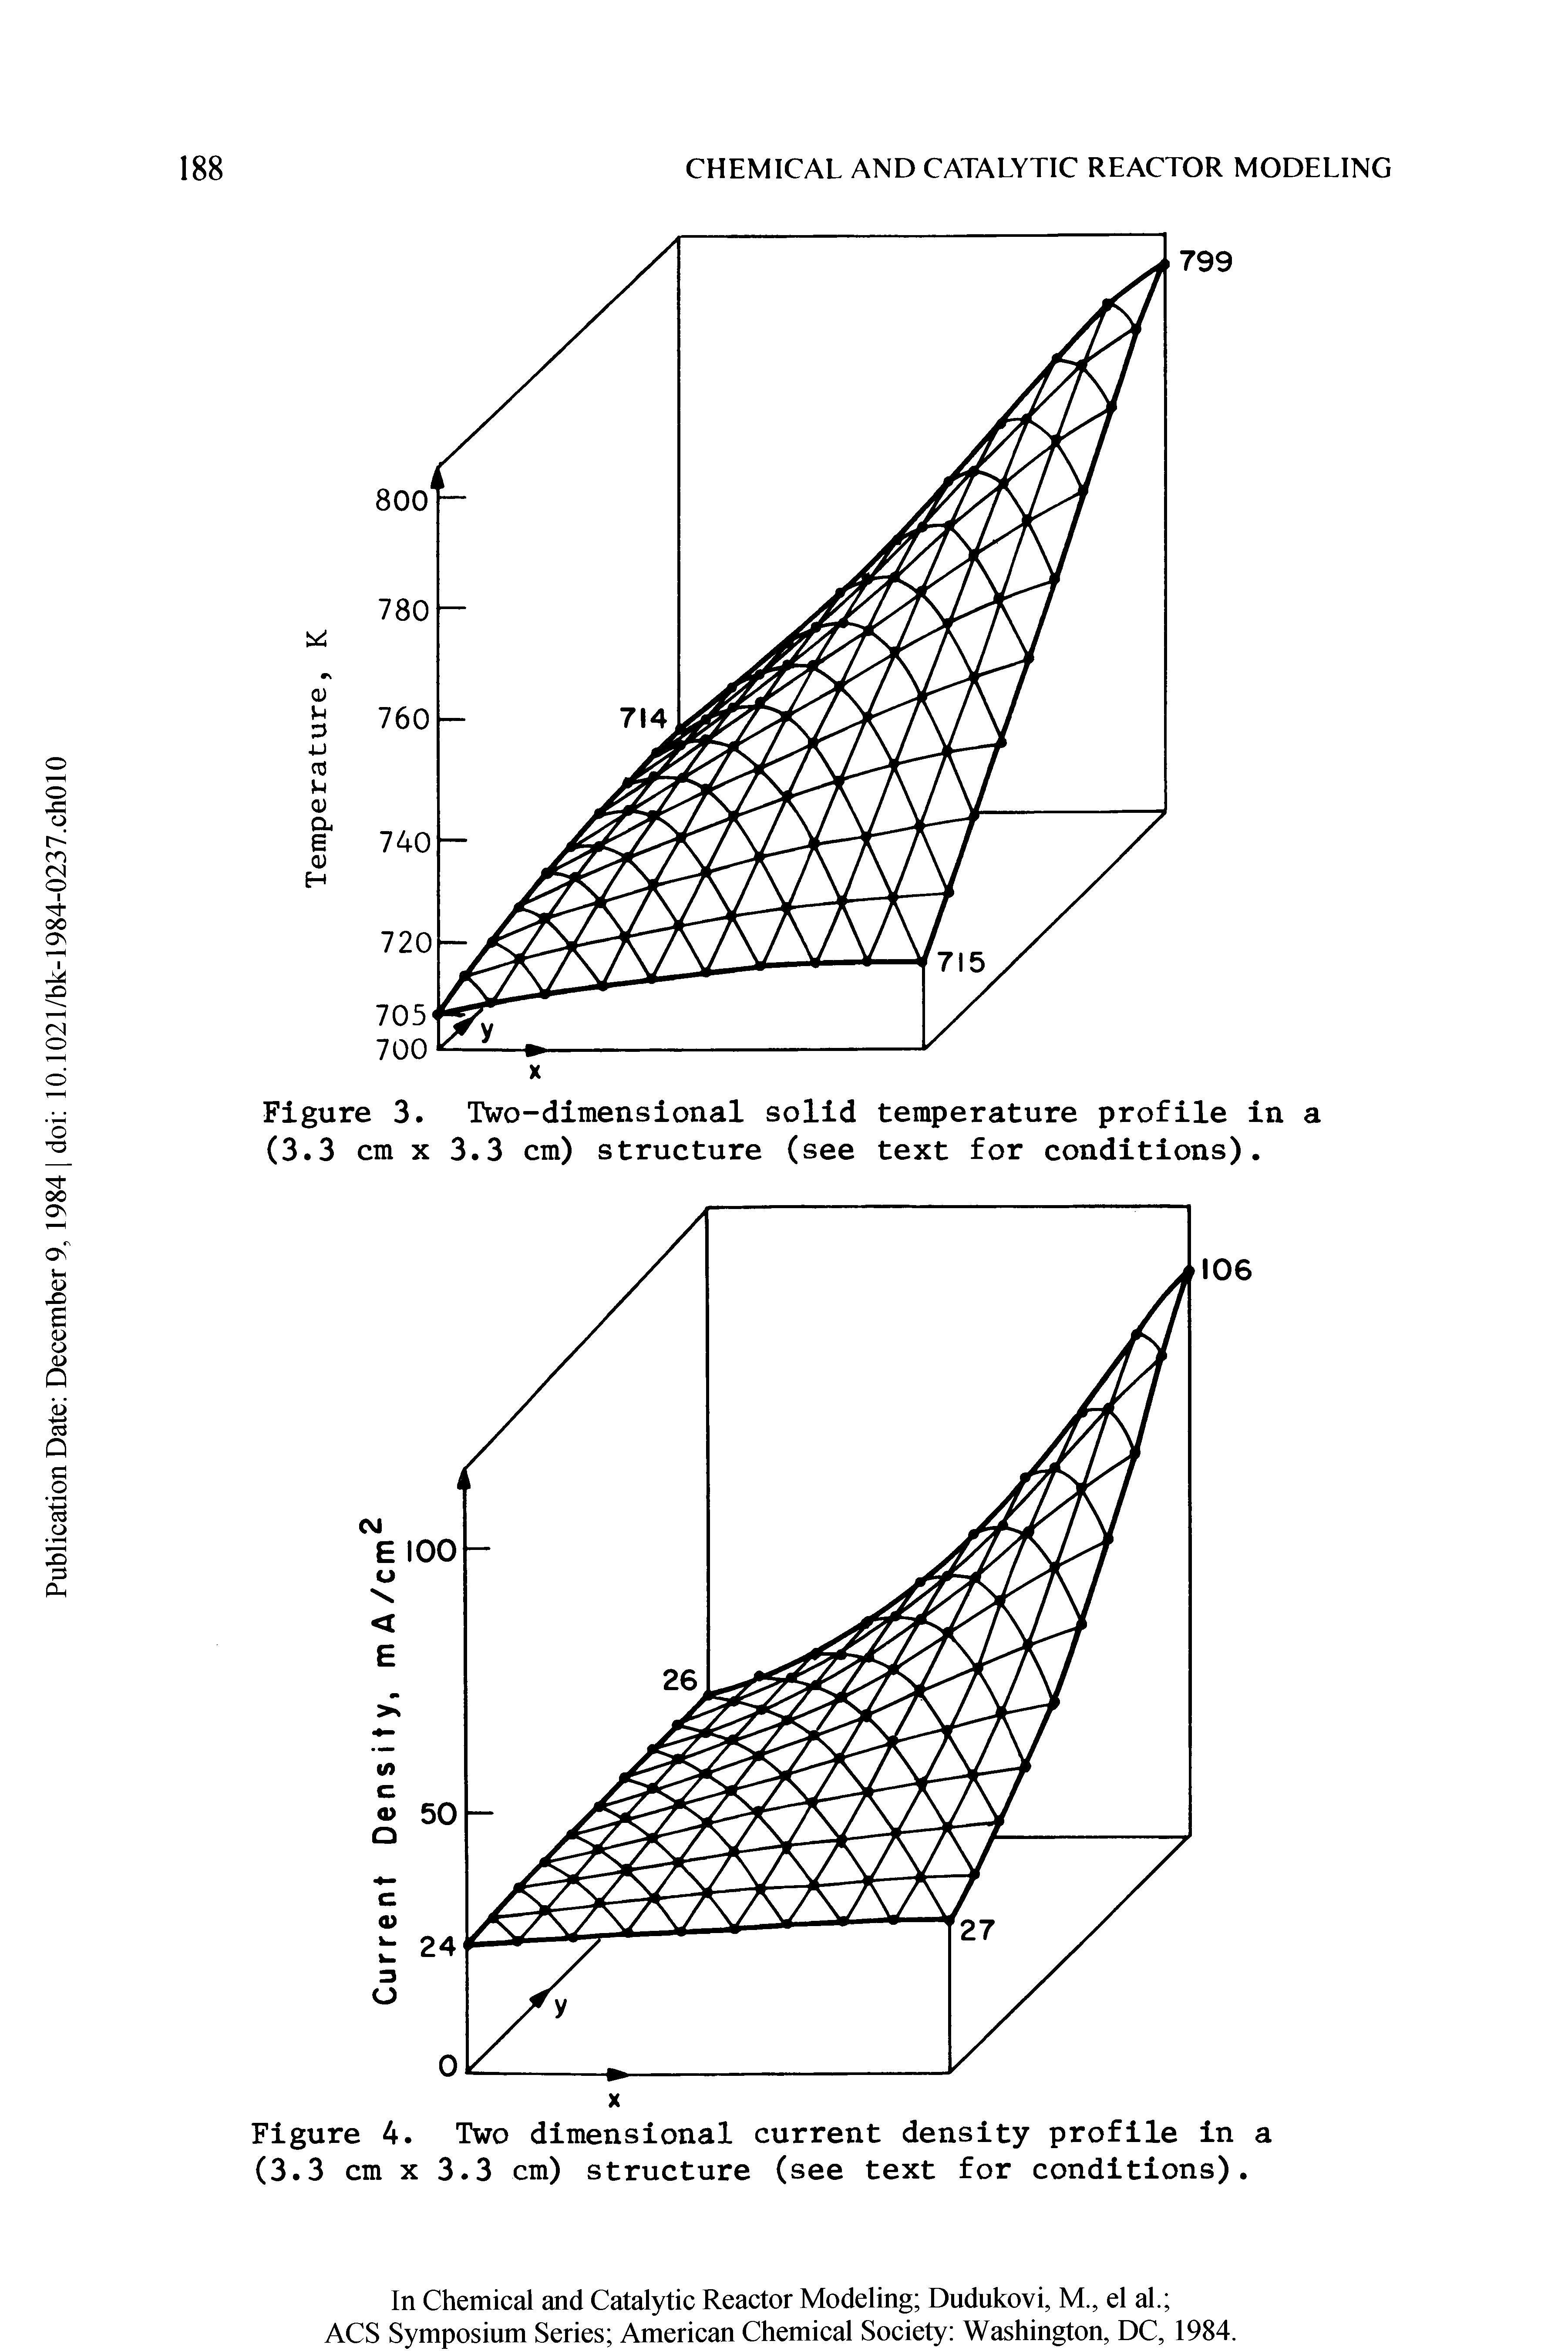 Figure 4. Two dimensional current density profile in a (3.3 cm x 3.3 cm) structure (see text for conditions).